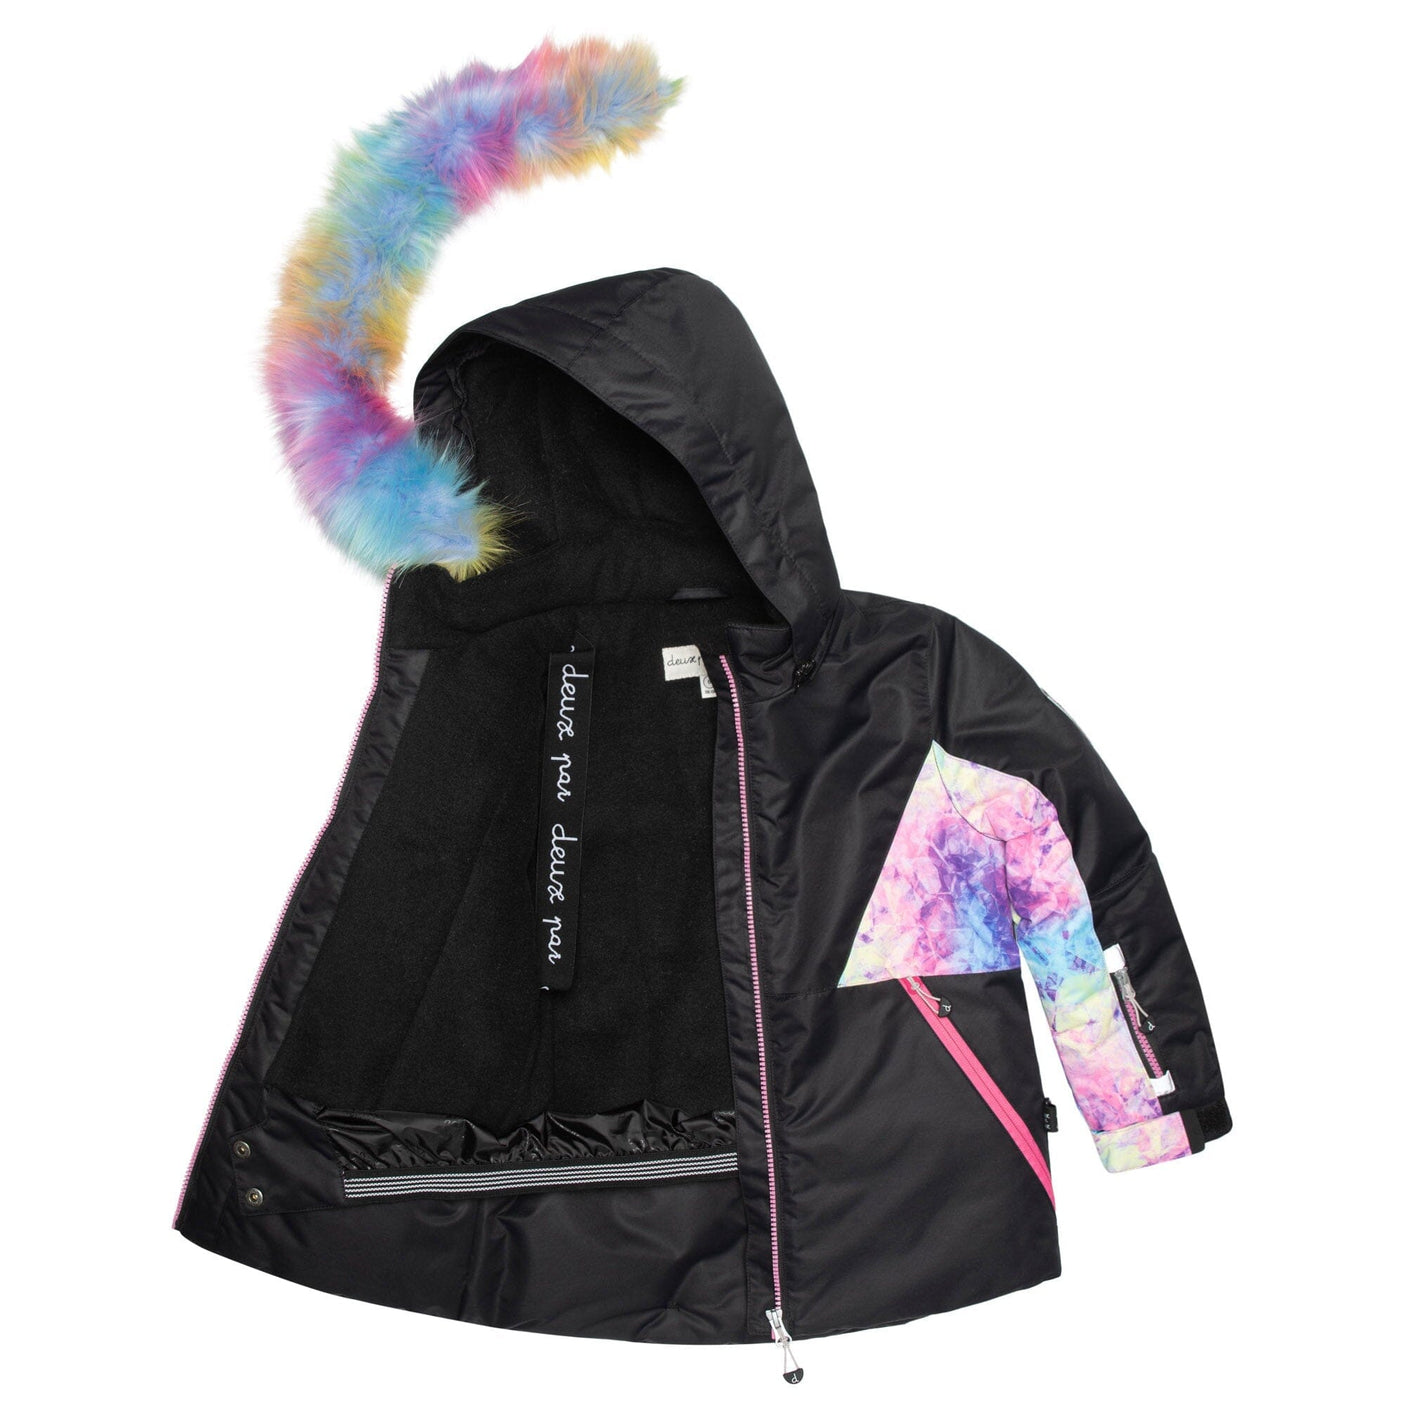 Two Piece Snowsuit Black With Frosted Rainbow Print-4